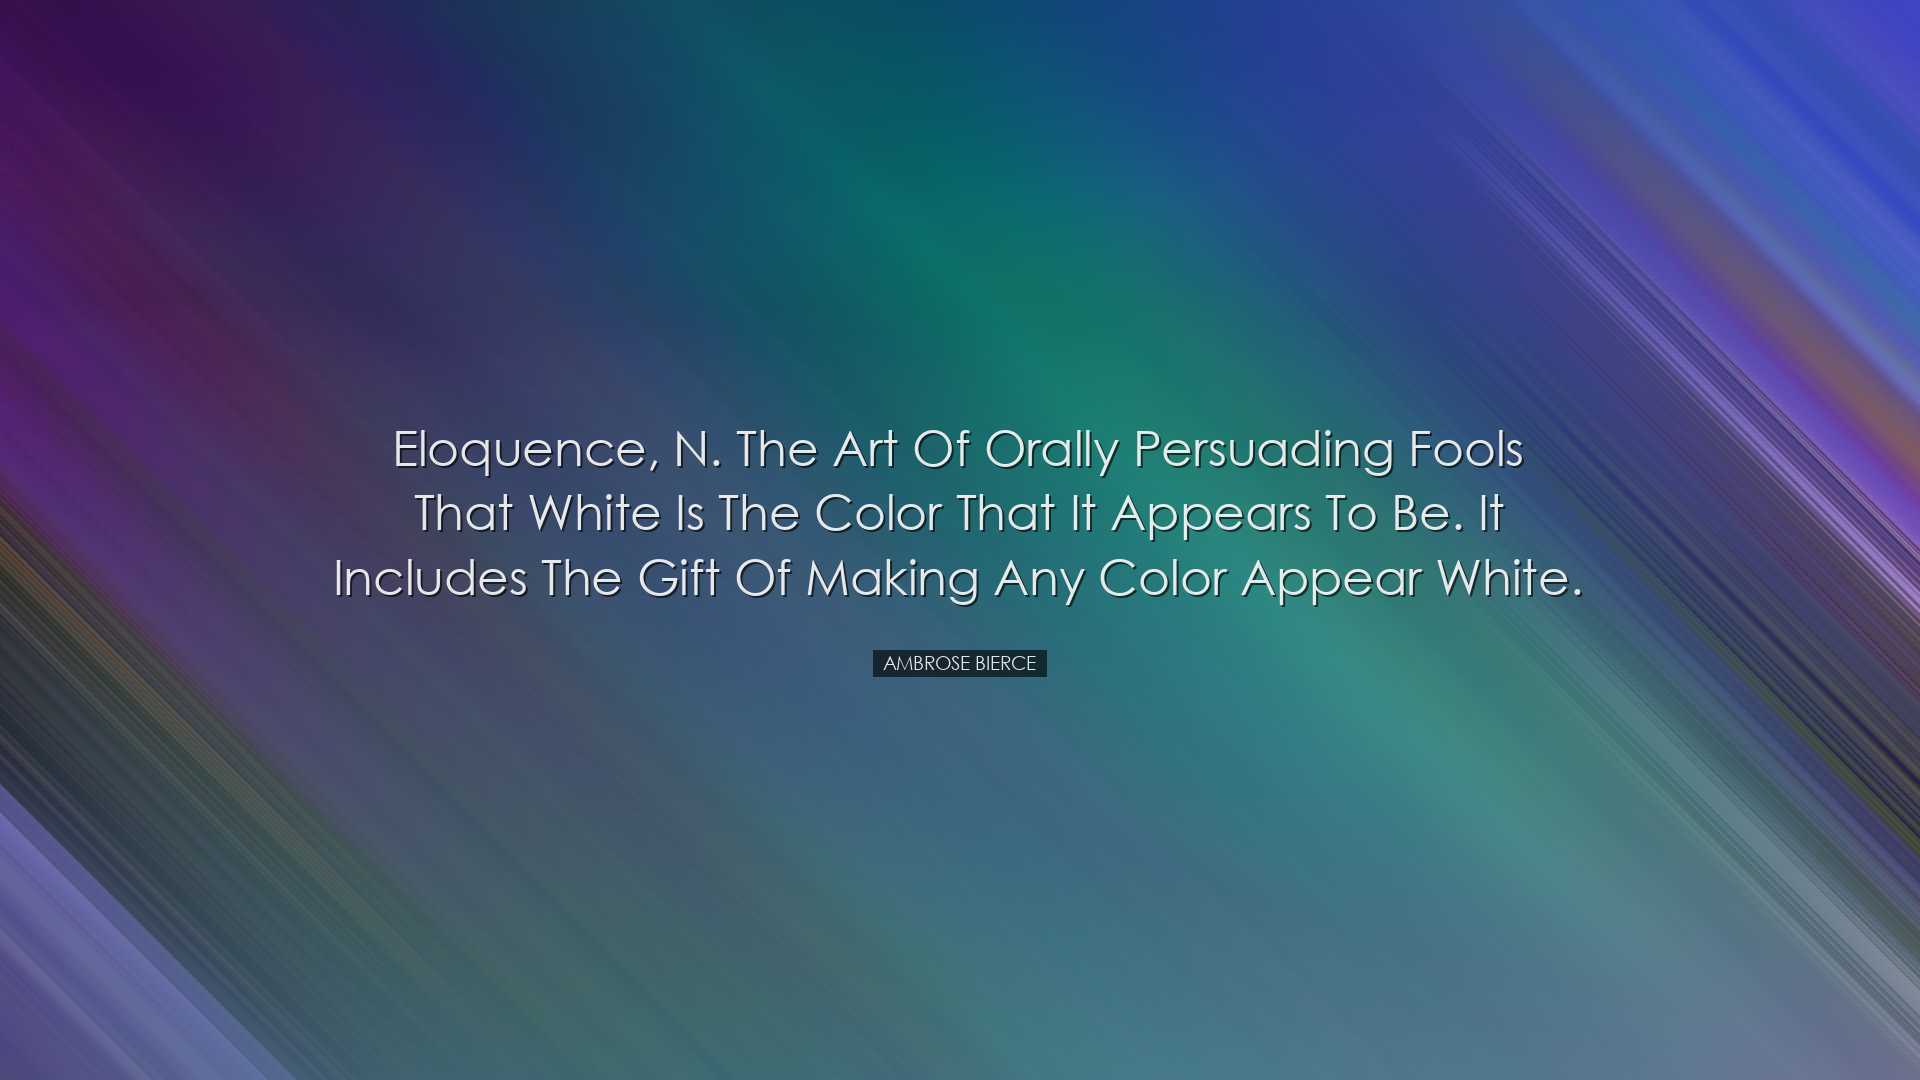 Eloquence, n. The art of orally persuading fools that white is the